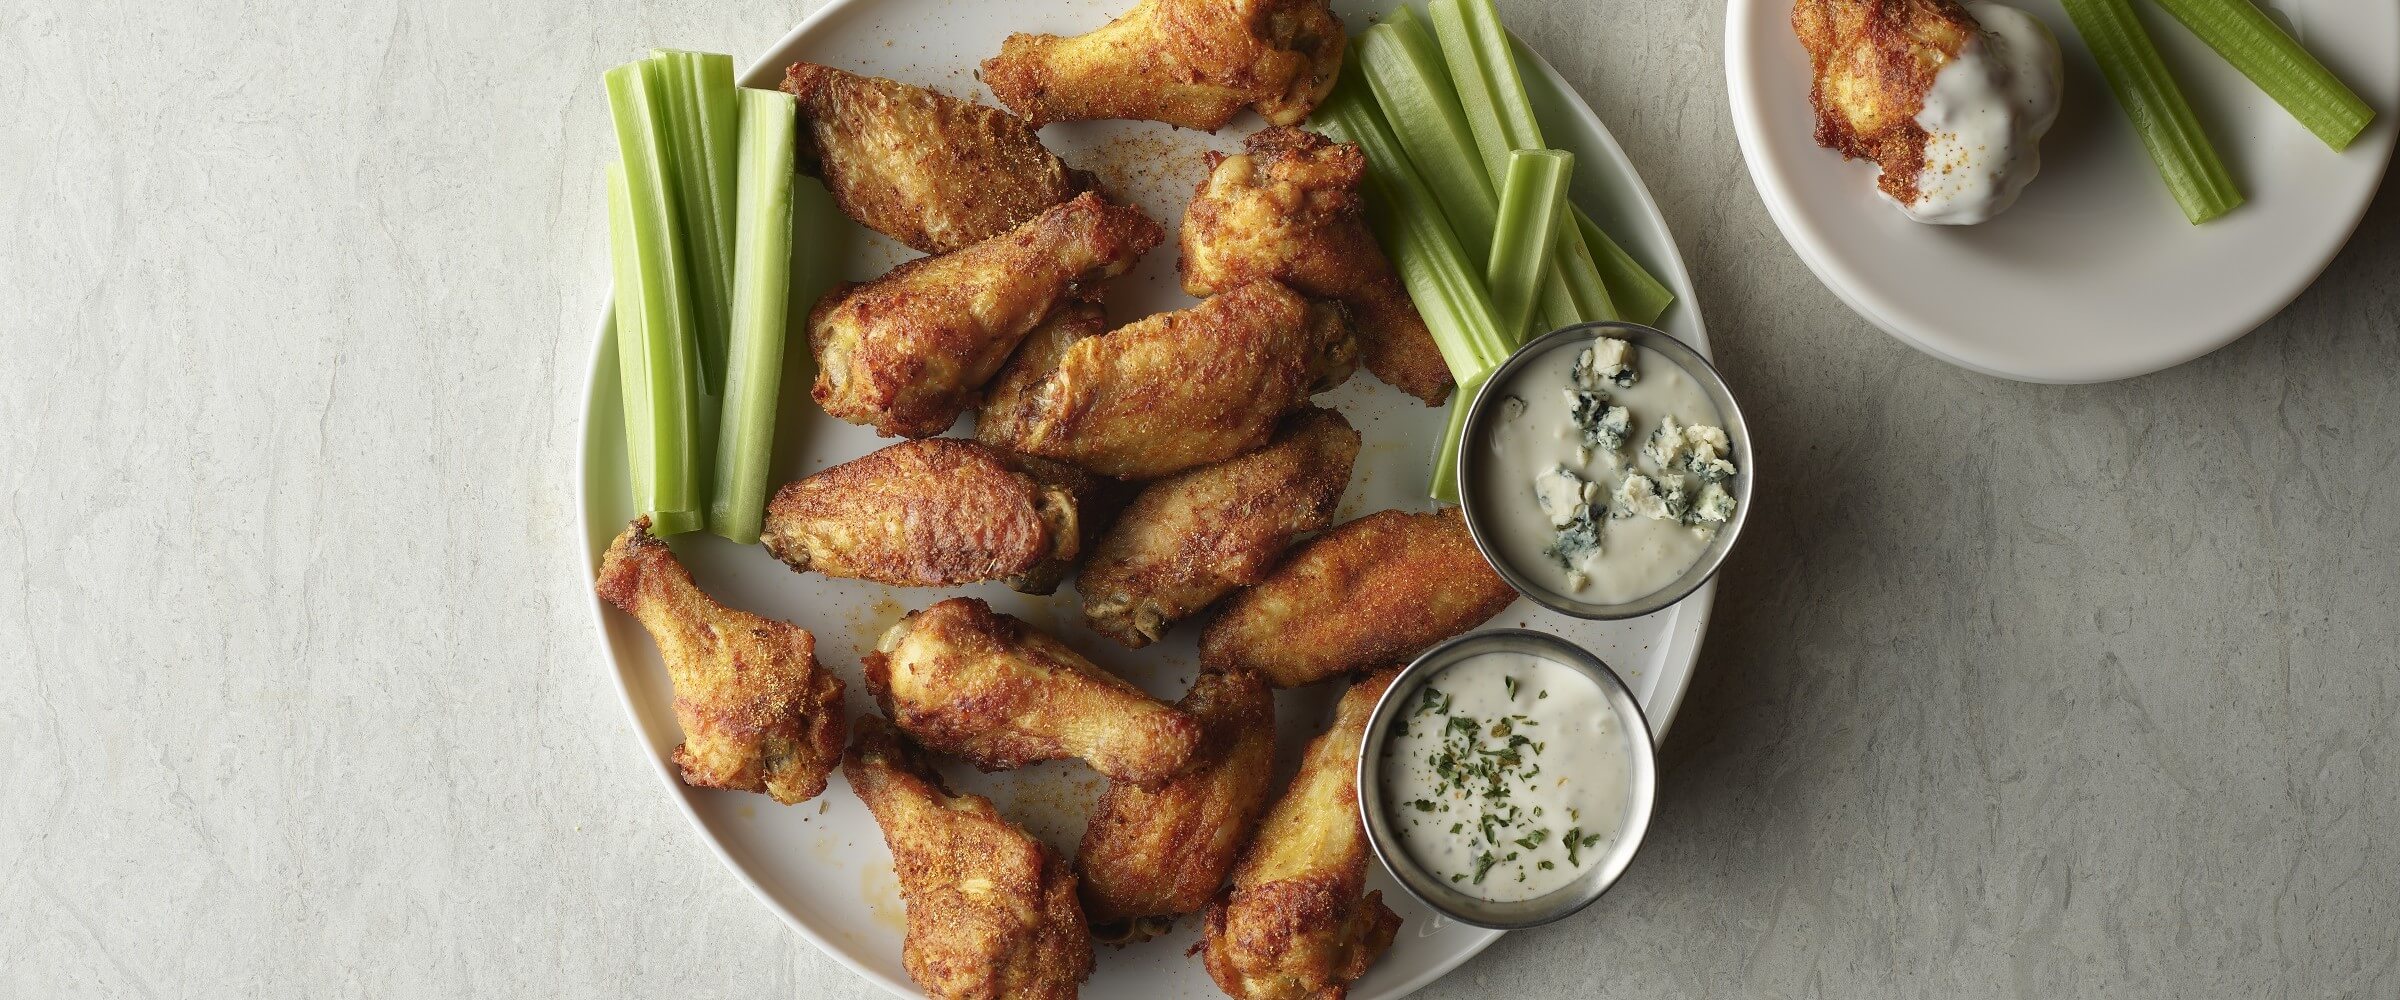 Herb dry rub chicken wings on plate with celery and bleu cheese dip